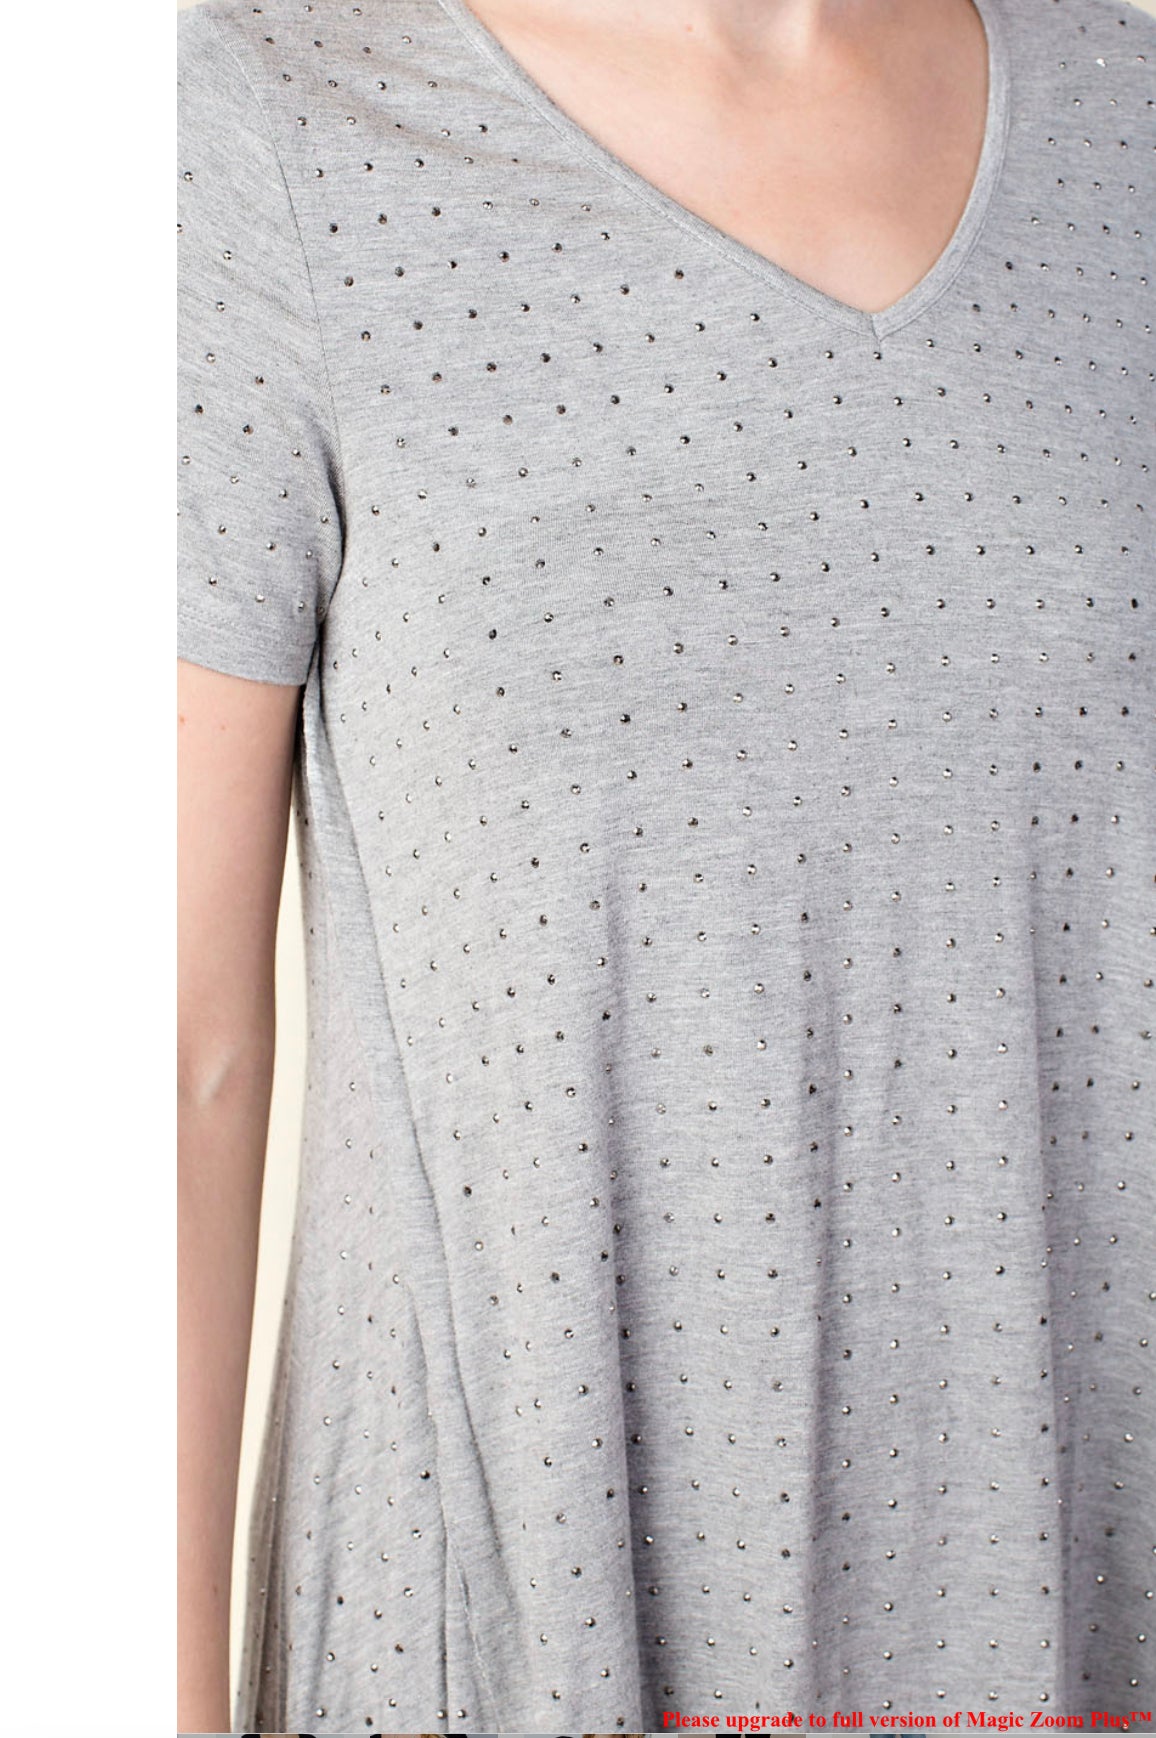 Heather Grey Short Sleeve Top w/ Bling Details